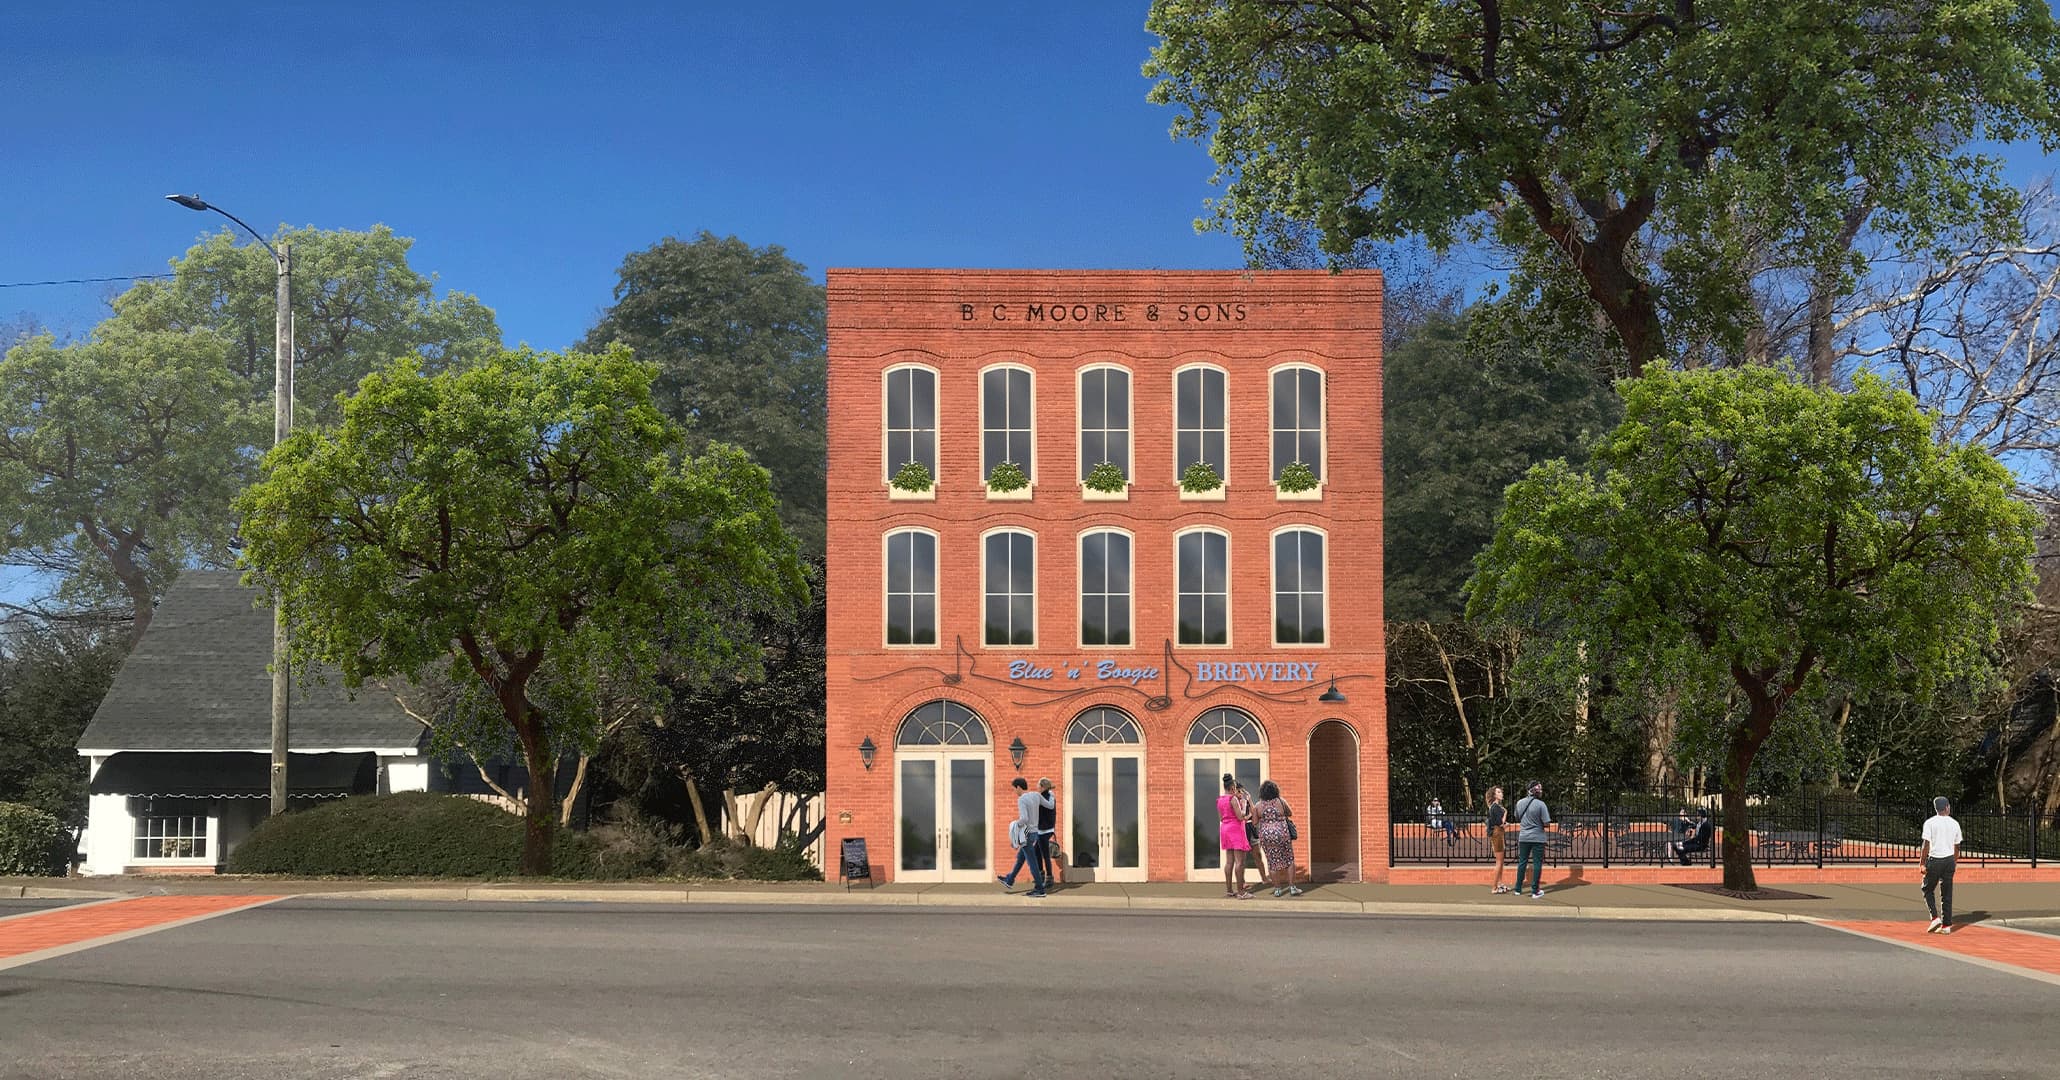 Boudreaux master planners worked with Town of Cheraw to reimagine buildings downtown.